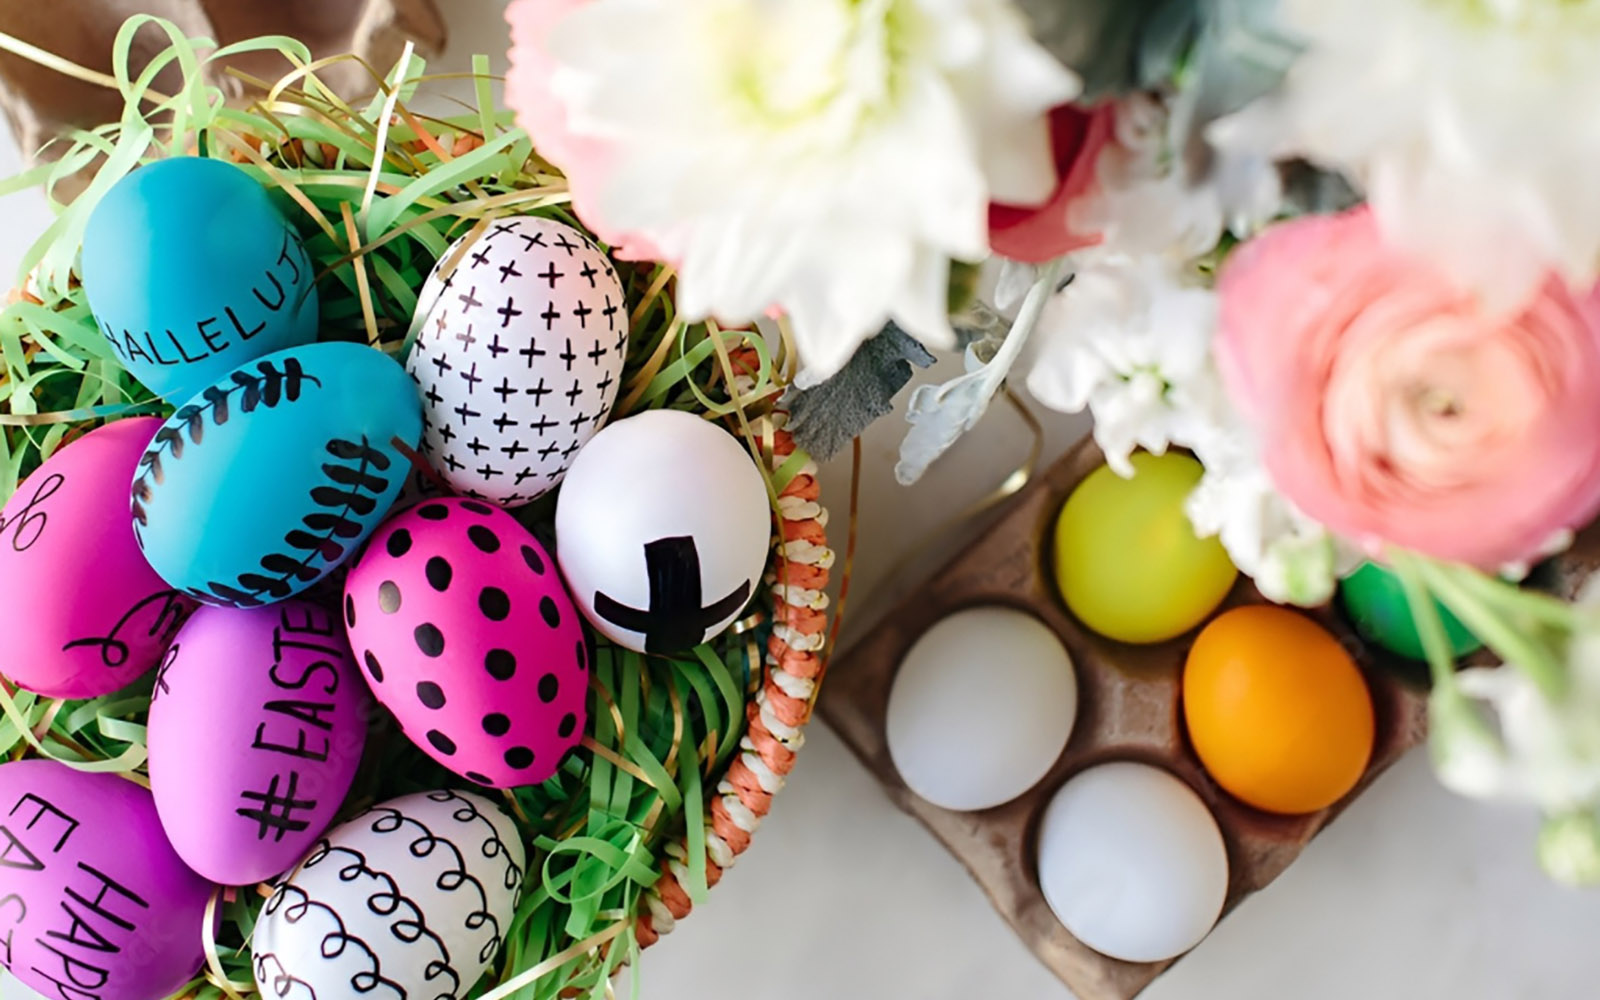 Colorful Easter eggs and spring flowers arrangement.